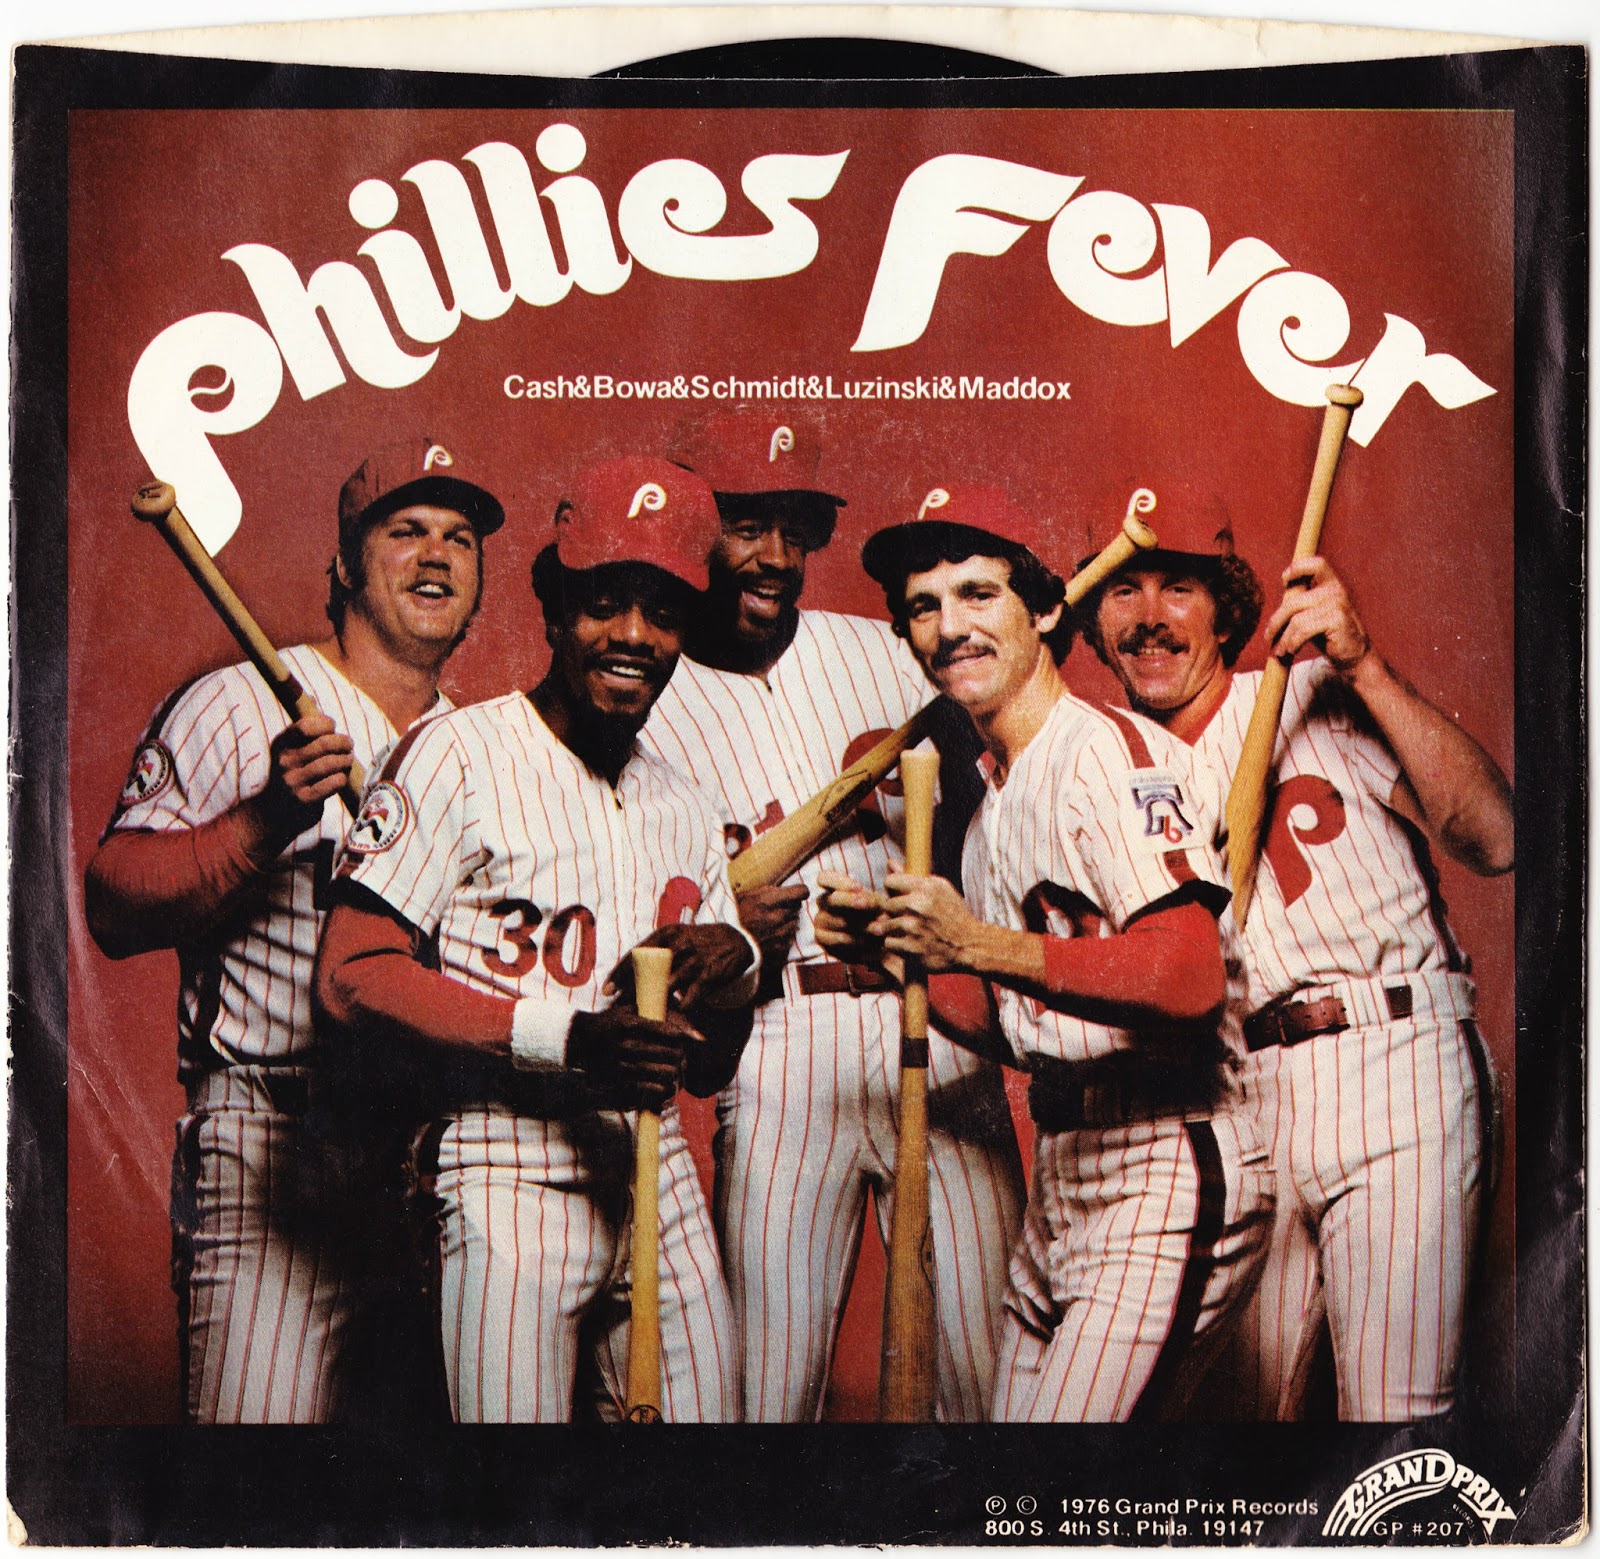 Papergreat: Some Phillies Fever from the Bicentennial summer of 1976